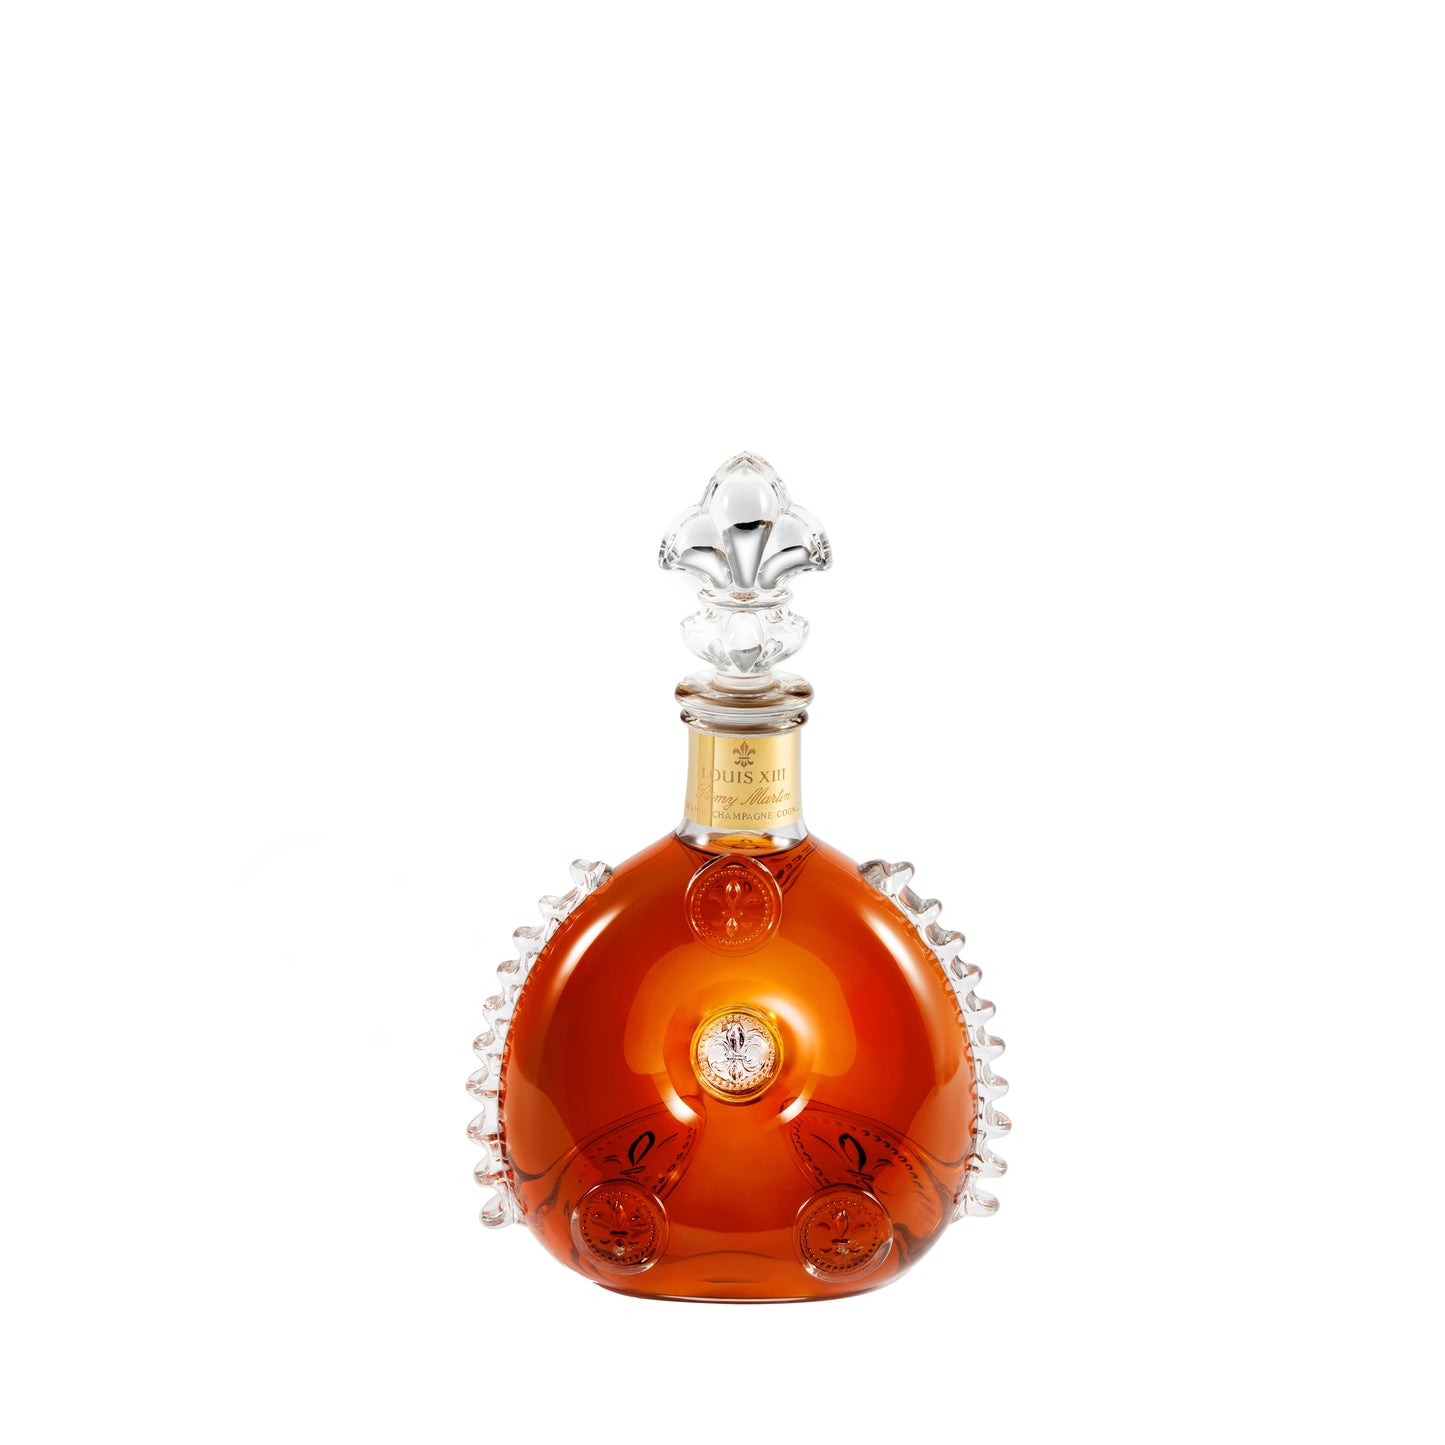 LOUIS XIII The Classic Decanter 750ml